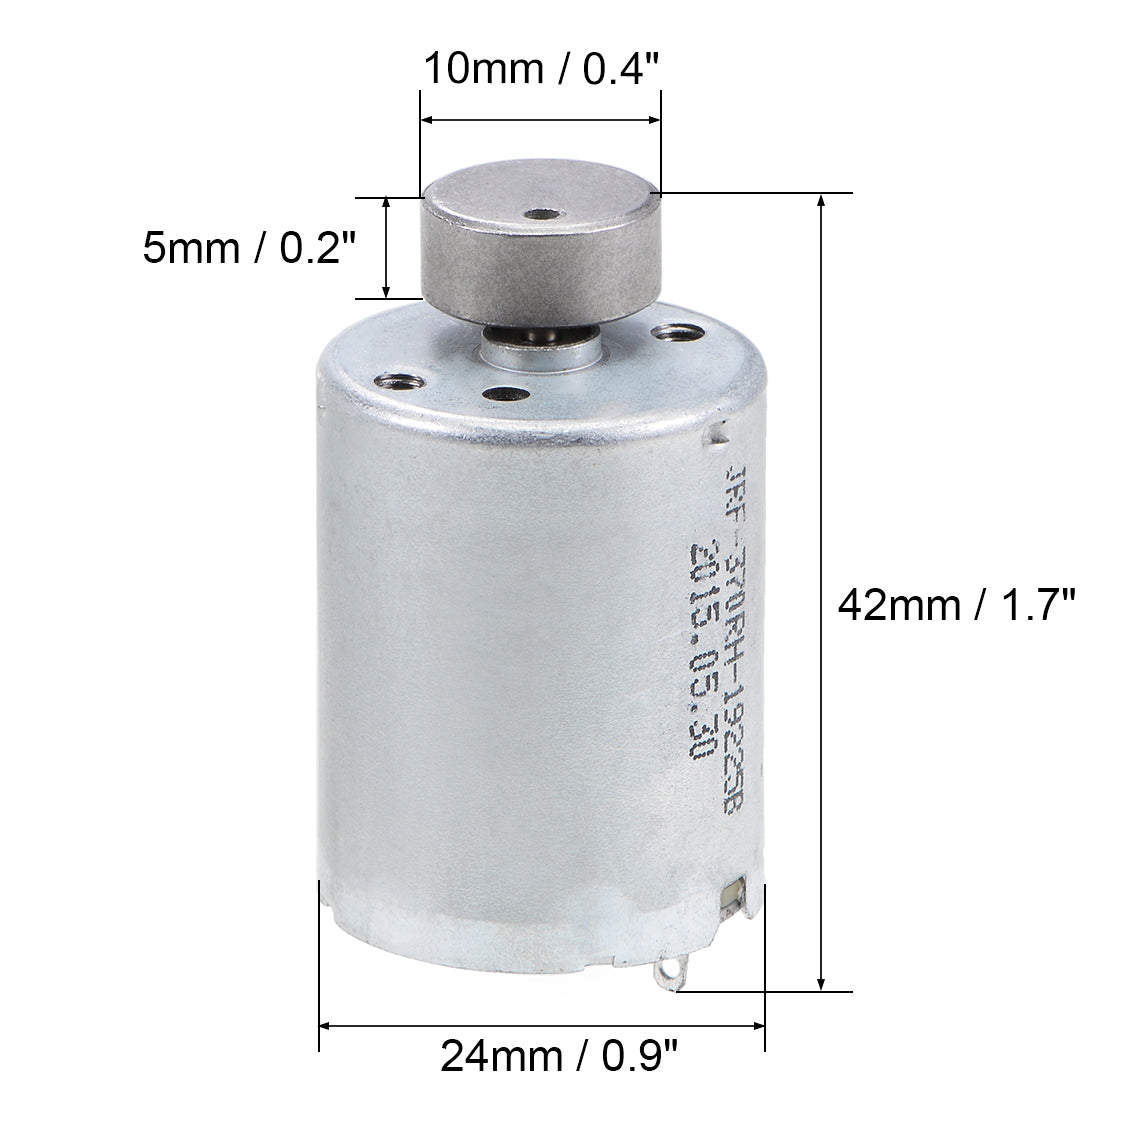 uxcell Uxcell Vibration Motors DC 12V 250mA 7500RPM Vibrating Motor Strong Power for DIY Electric  42x24mm